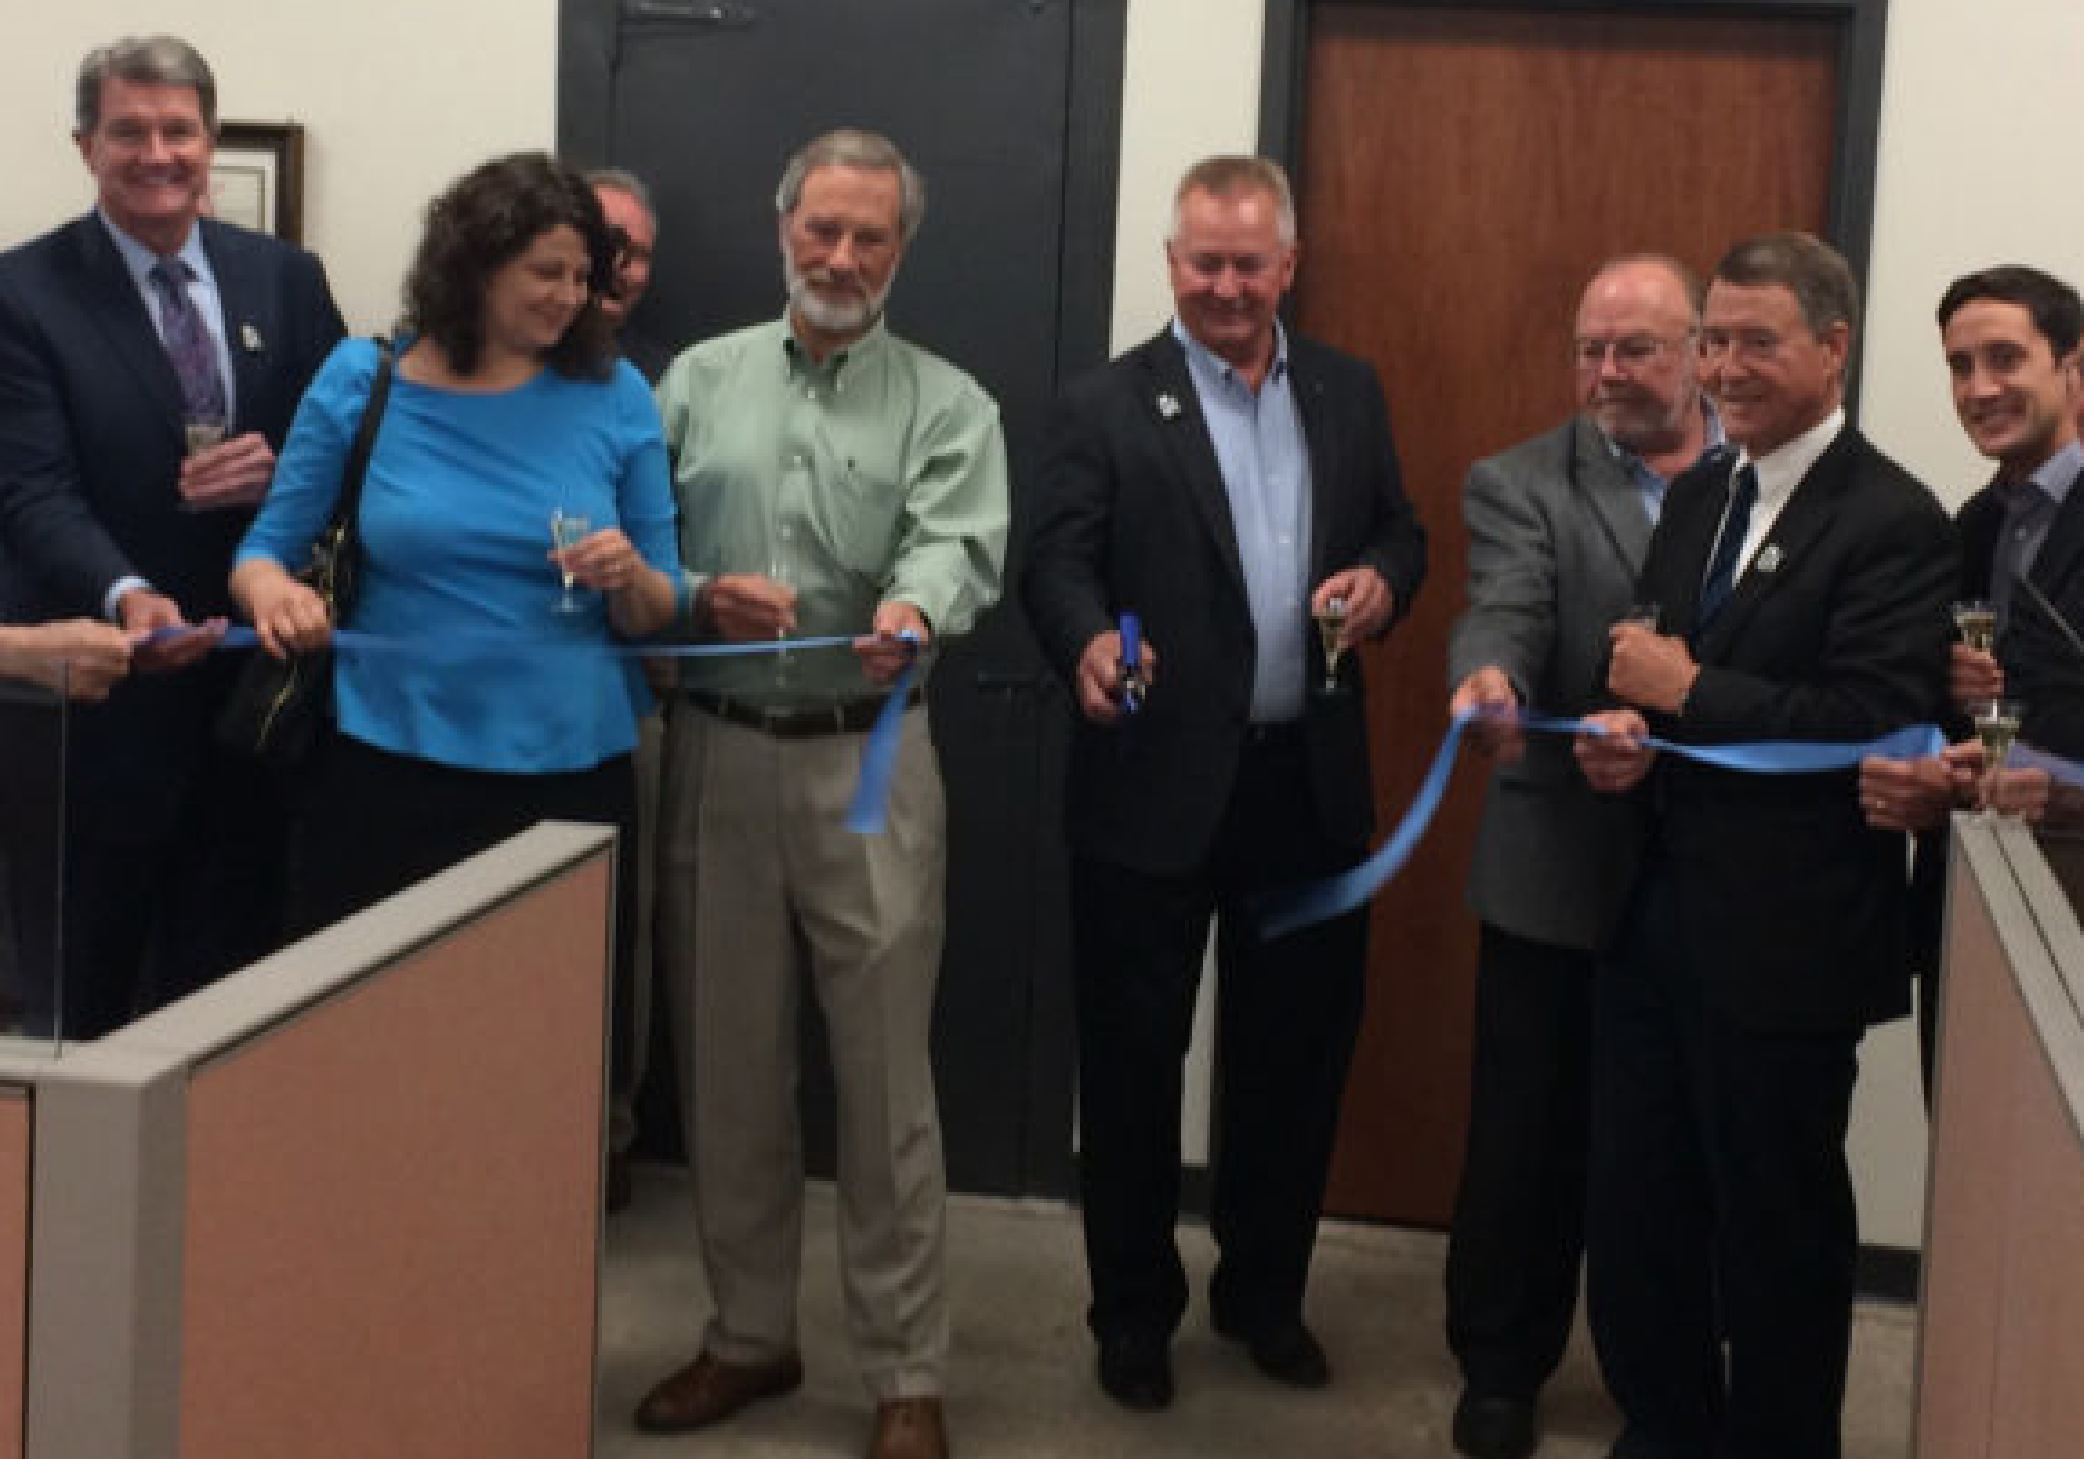 Ribbon cutting for Beyond Vision's new call center.